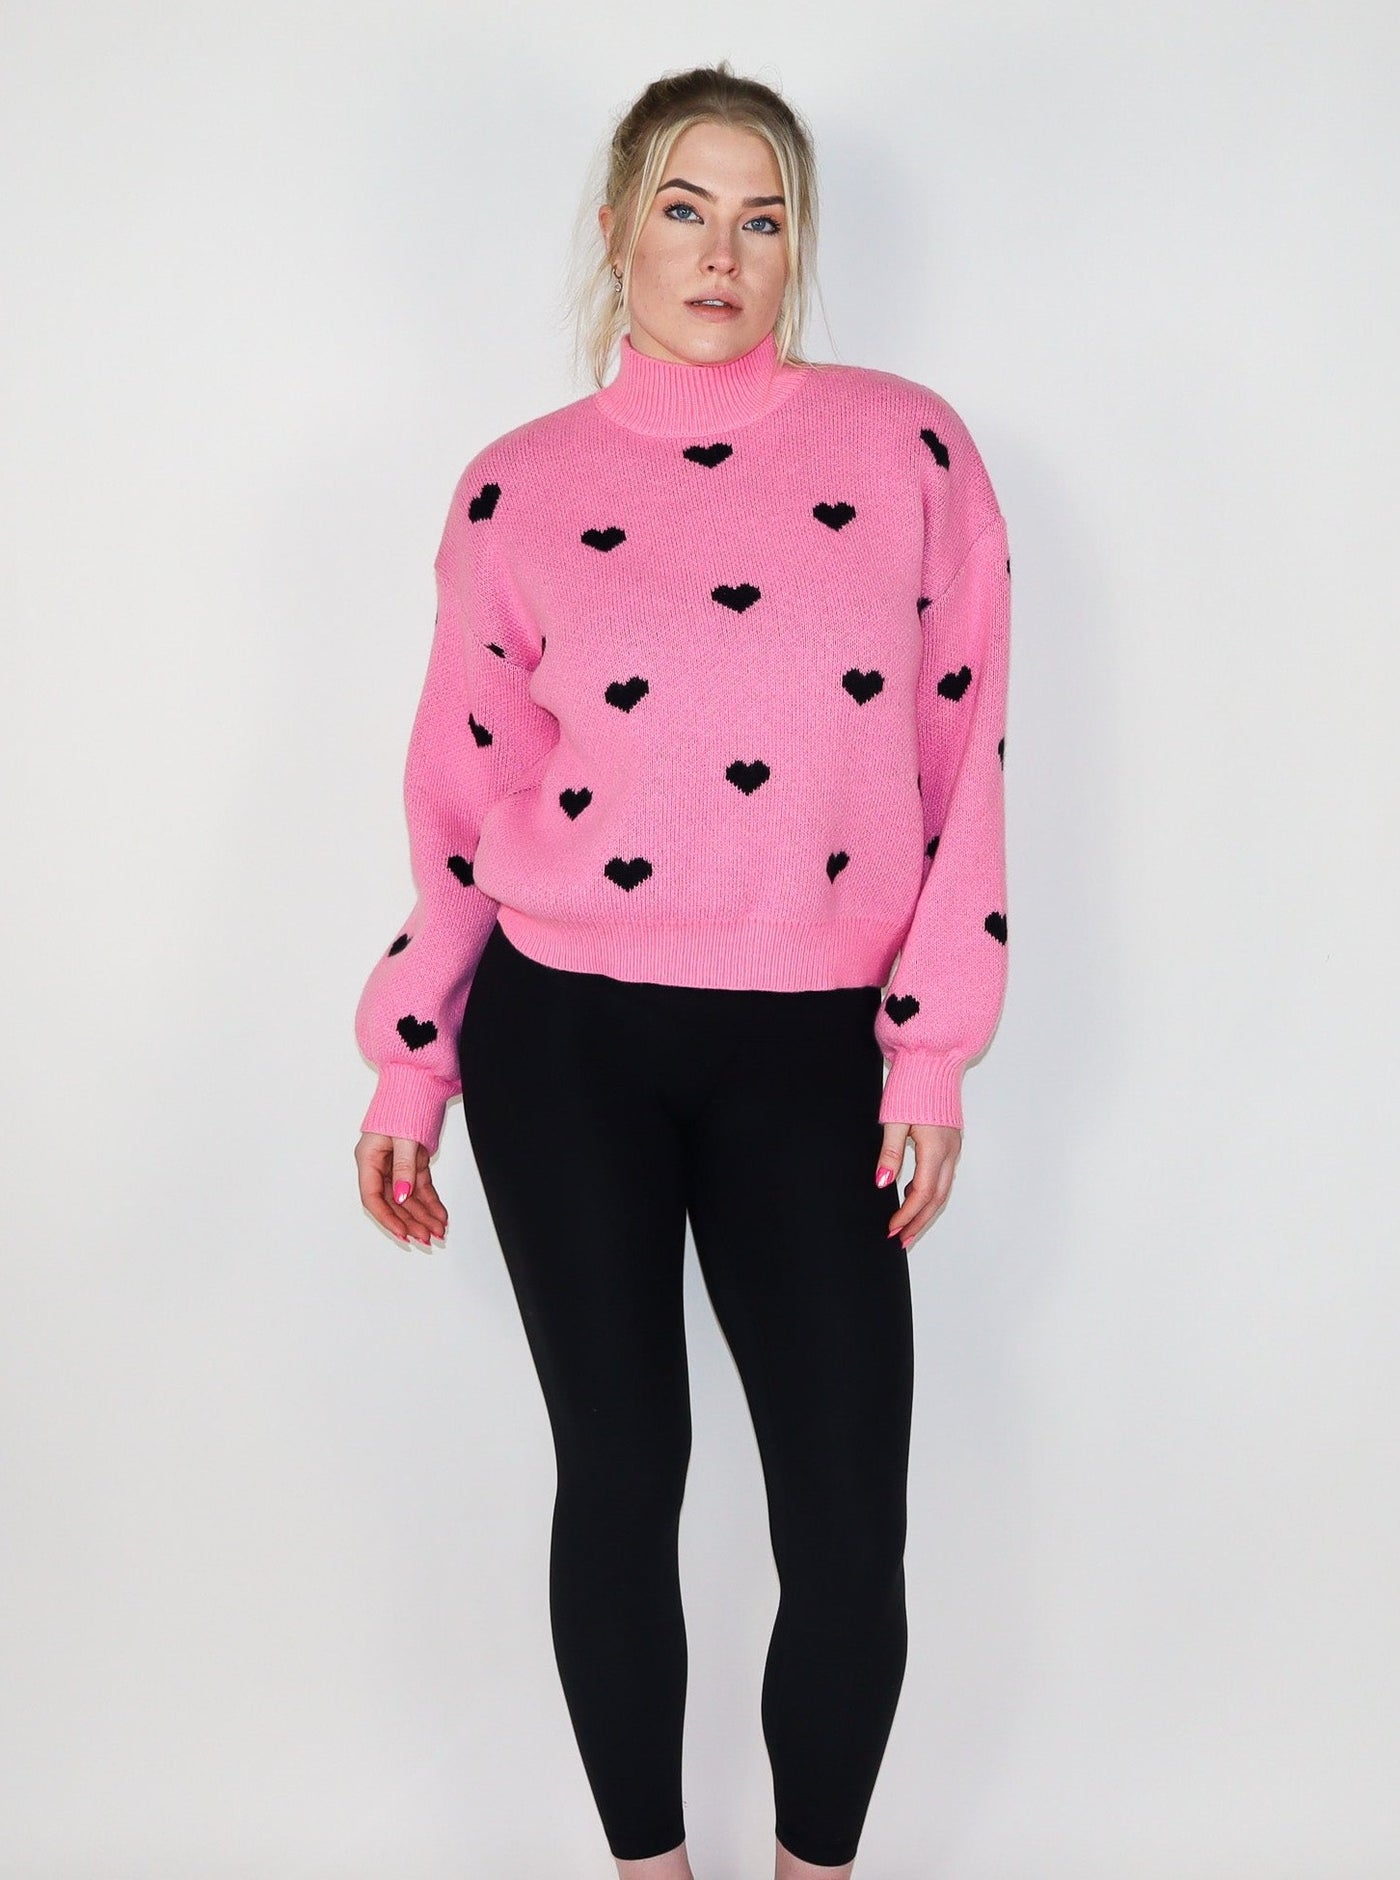 Model is wearing a hot pink turtle neck knitted sweater with black hearts. Sweater is paired with black leggings. 